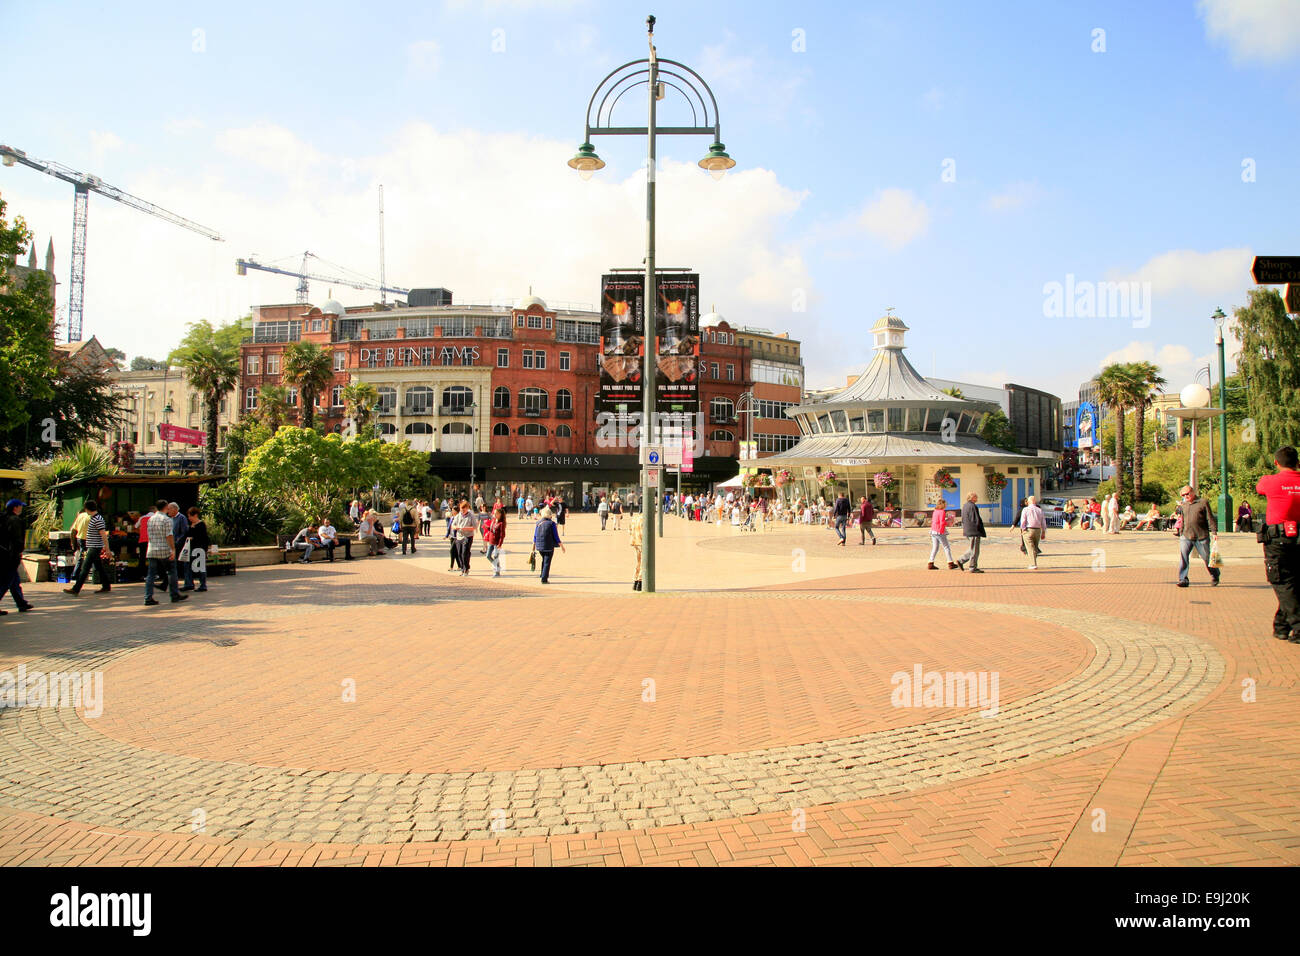 The town centre square at Bournemouth, Dorset, England, UK. Stock Photo